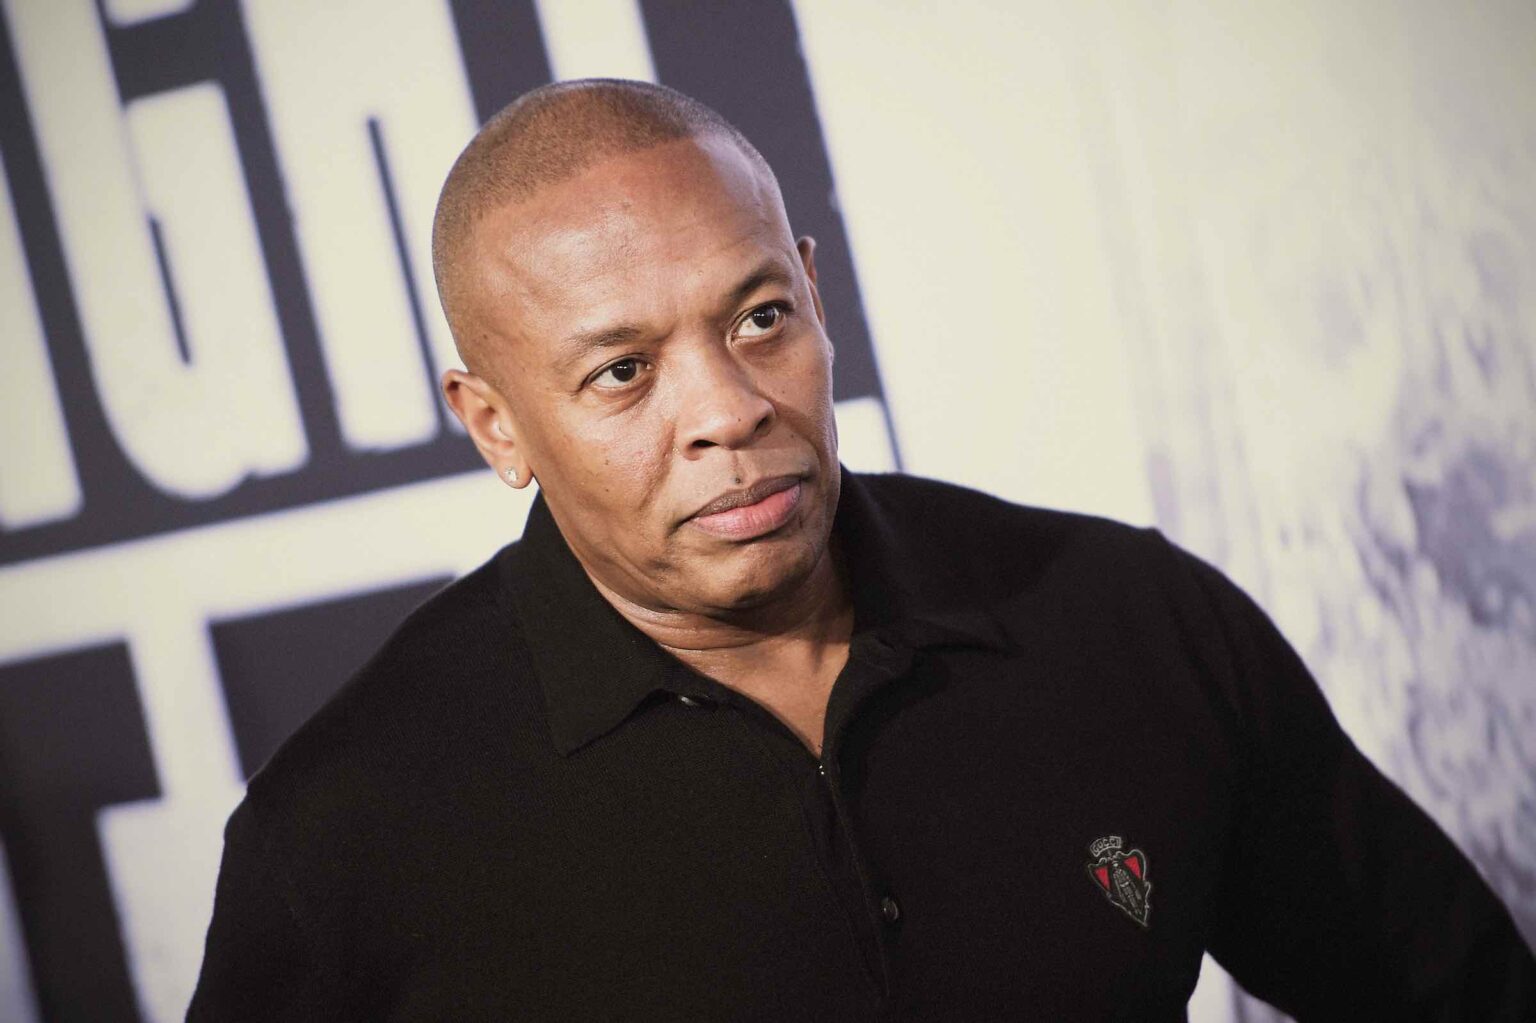 Dr. Dre & Nicole Young’s divorce is about to get a lot messier. Here’s what it might mean for Dr. Dre’s net worth.